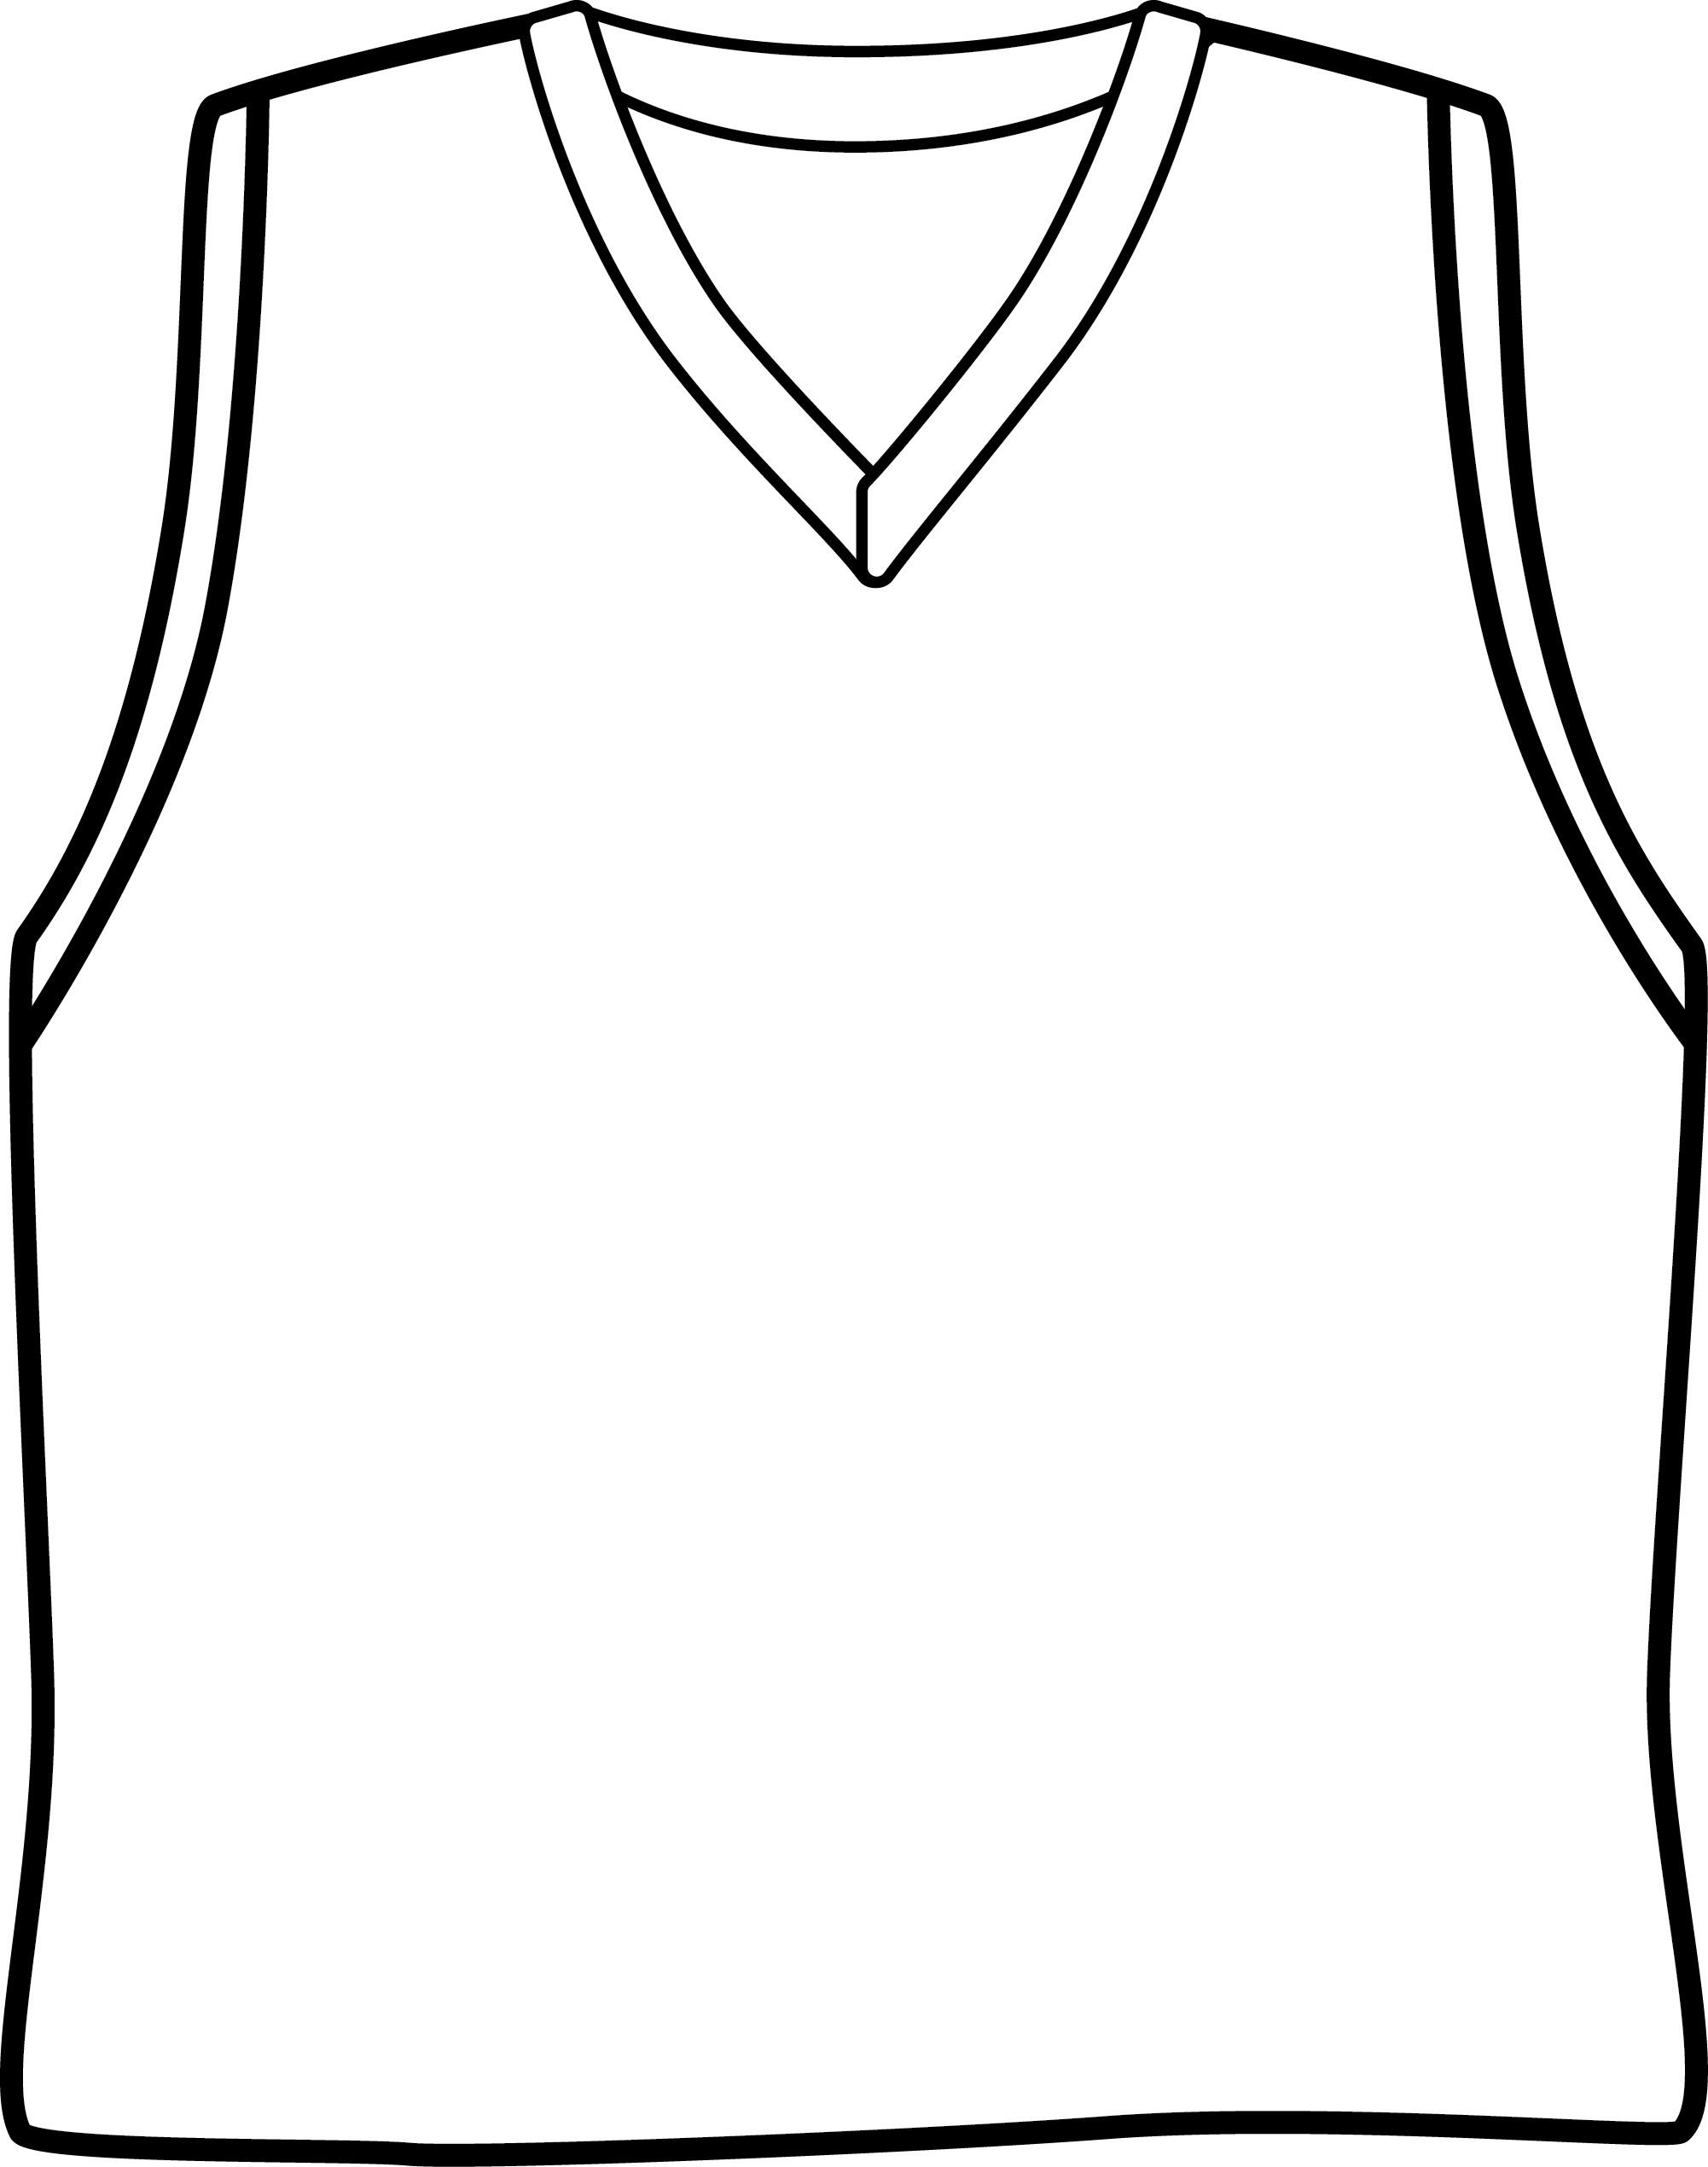 Blank Basketball Jersey Clipart Free download on ClipArtMag